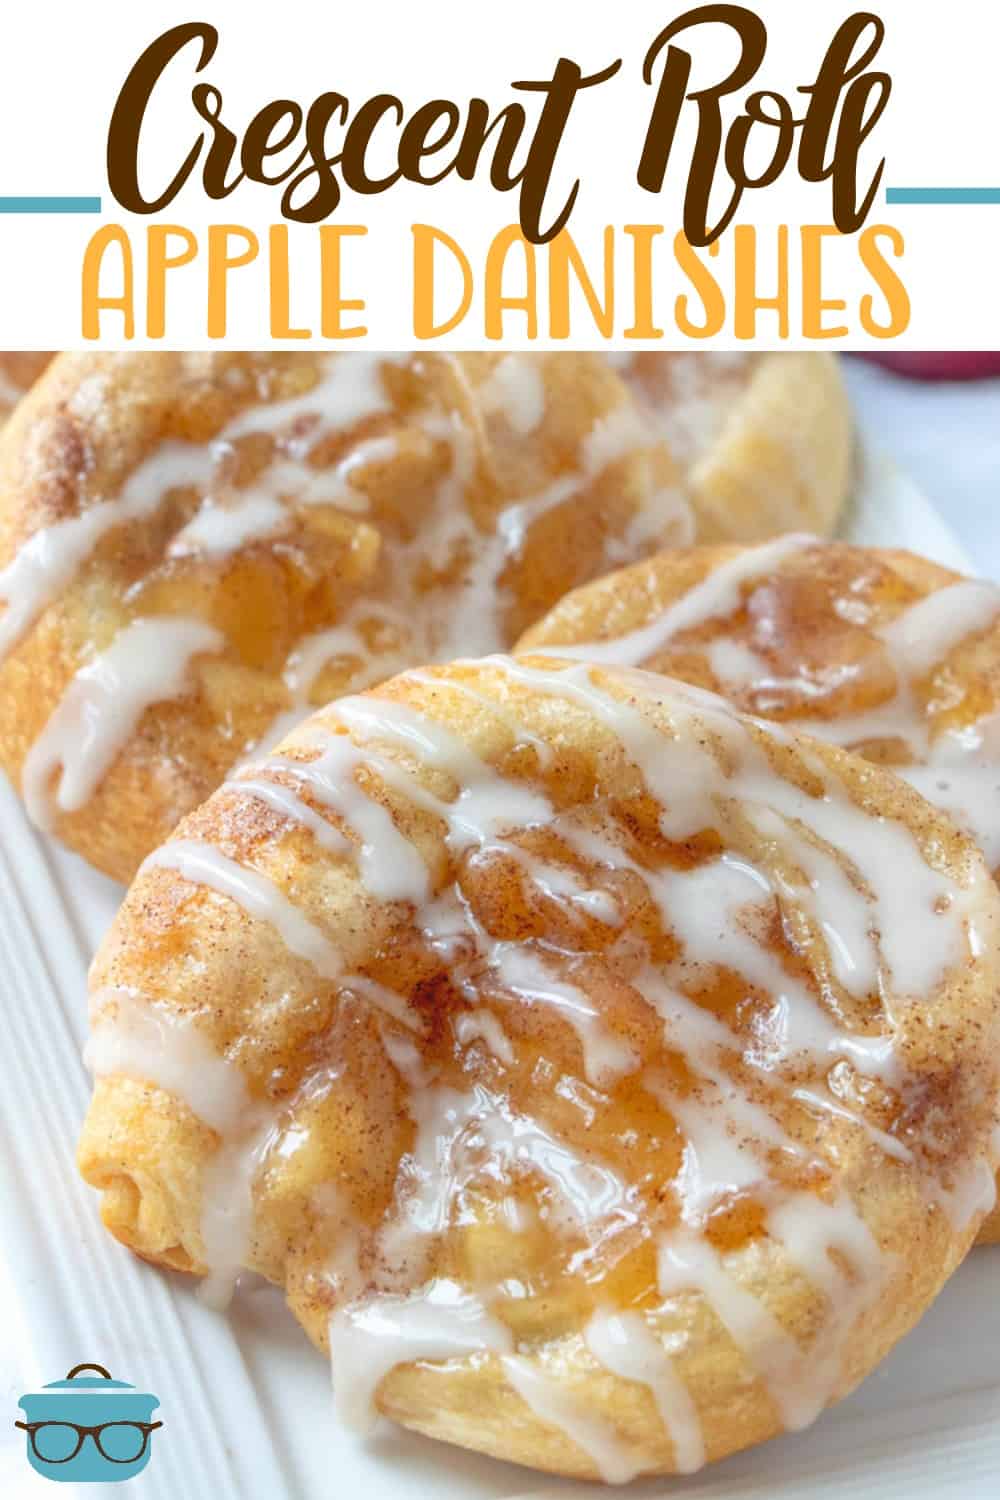 Easy Crescent Roll Apple Danish recipe from The Country Cook. Apple danishes shown closeup and layered on a white platter. 